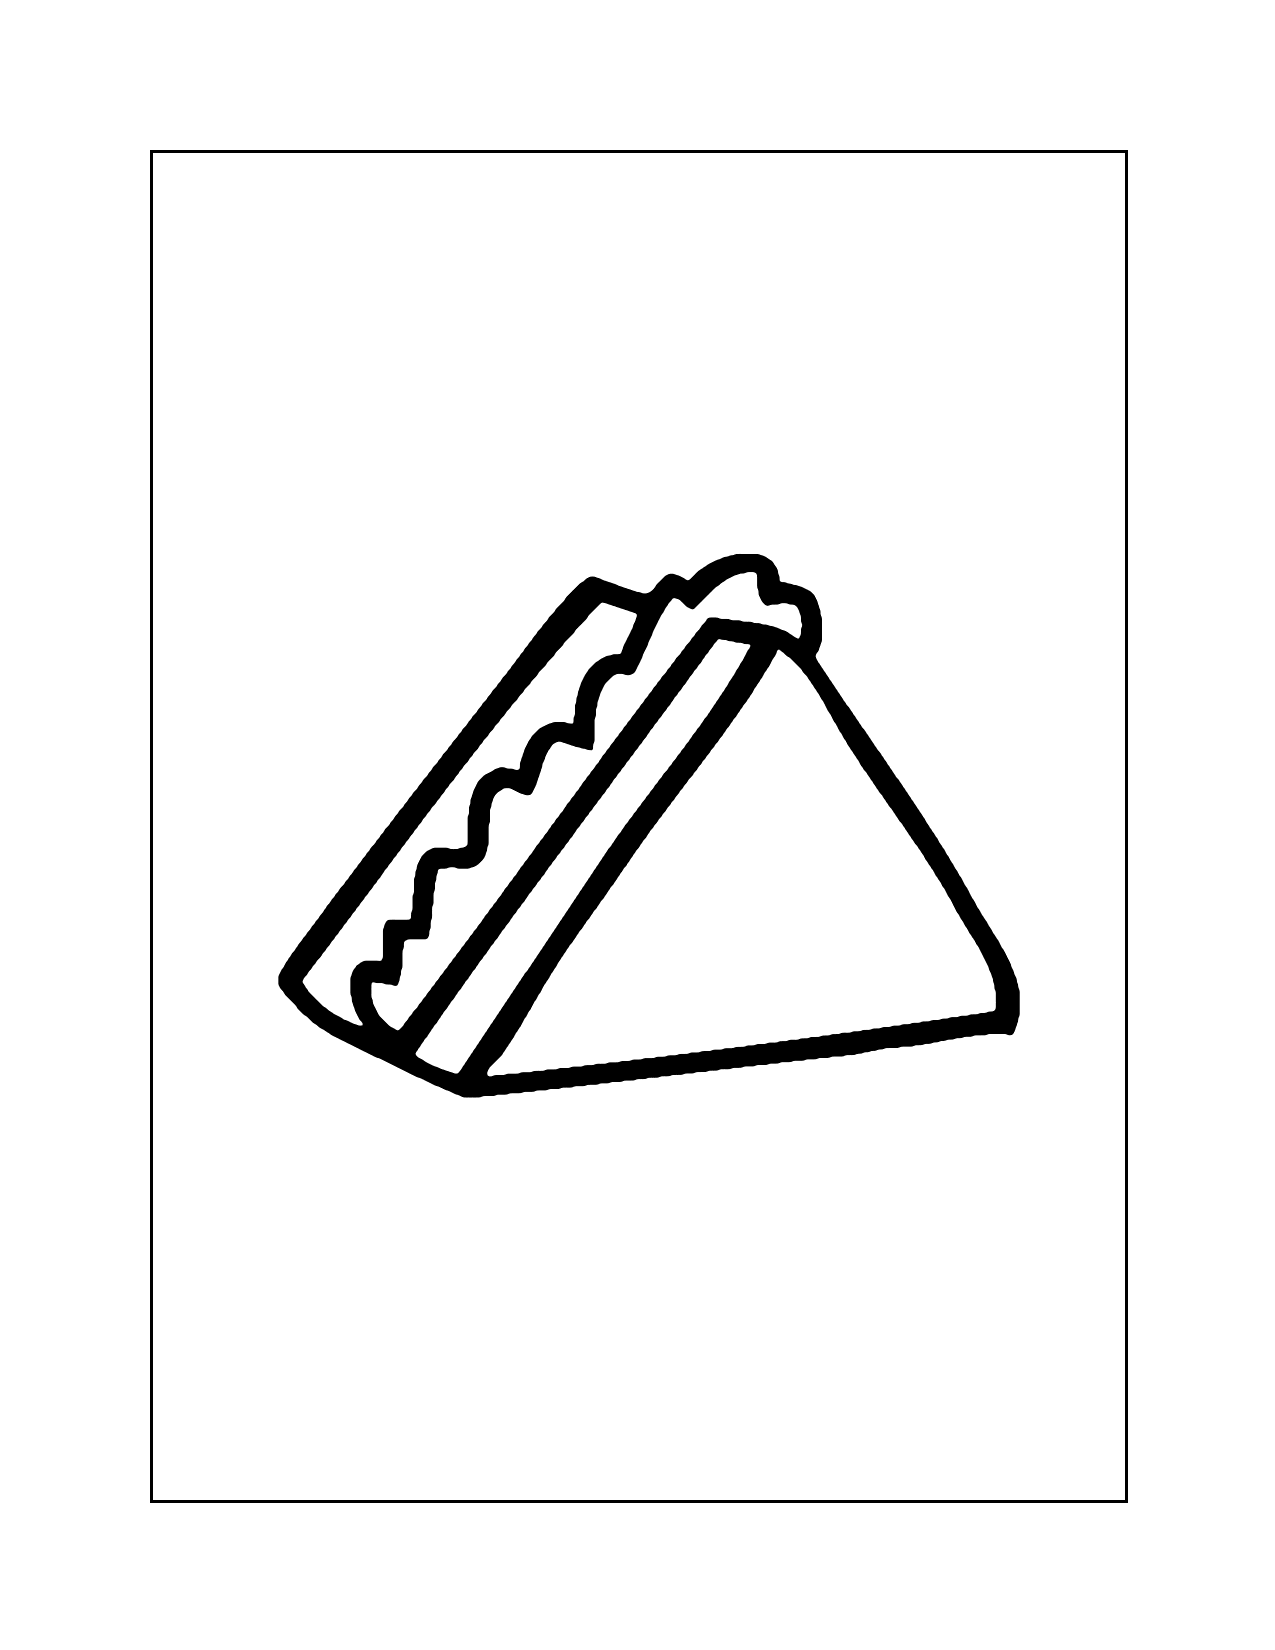 Easy Sandwich Coloring Page